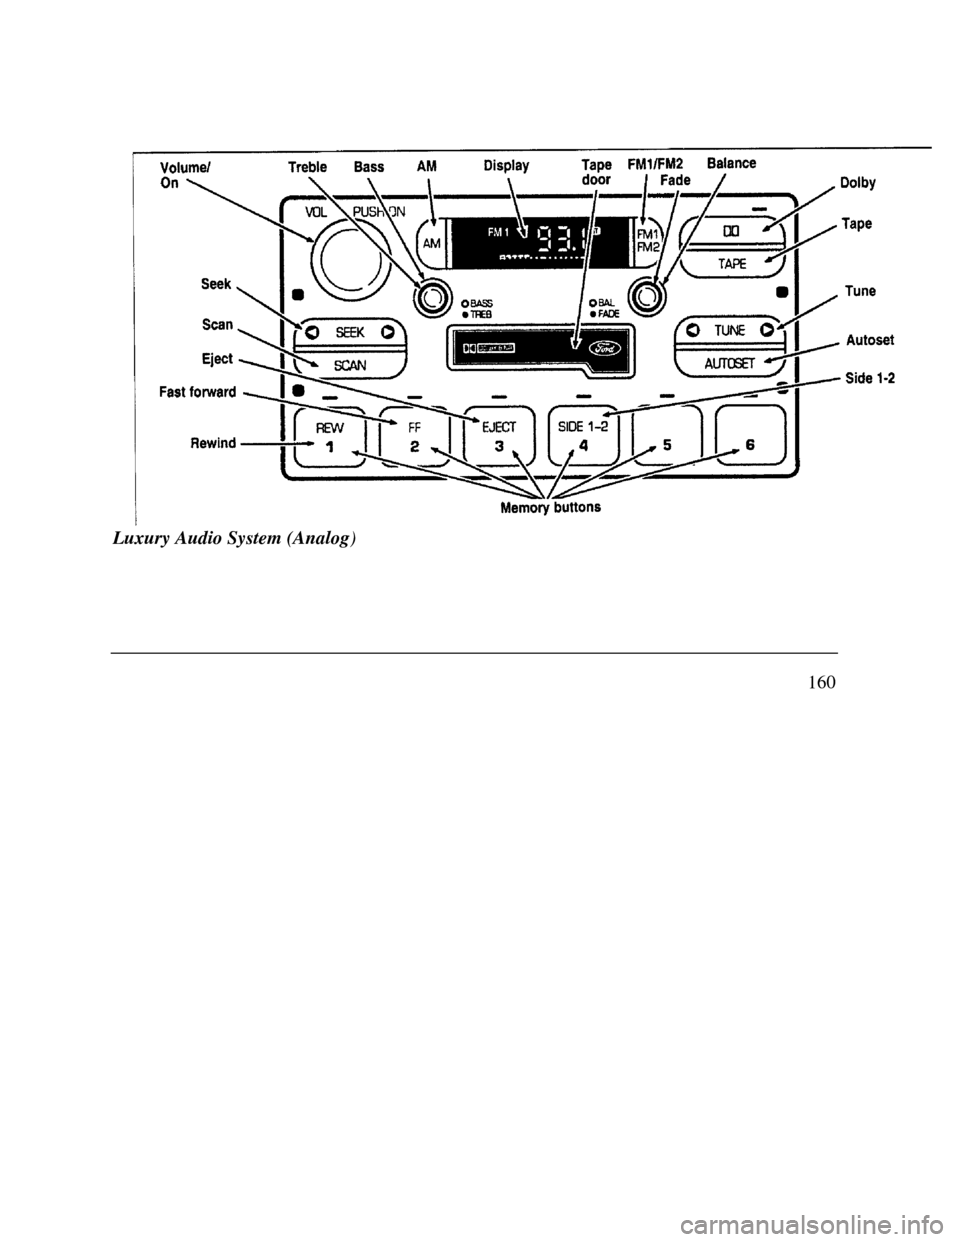 LINCOLN CONTINENTAL 1996  Customer Assistance Guide Volume/           Treble Bass AM Display SCAN Dolby Tape Tune Autoset FastforwardLuxury Audio System (Analog)
160 